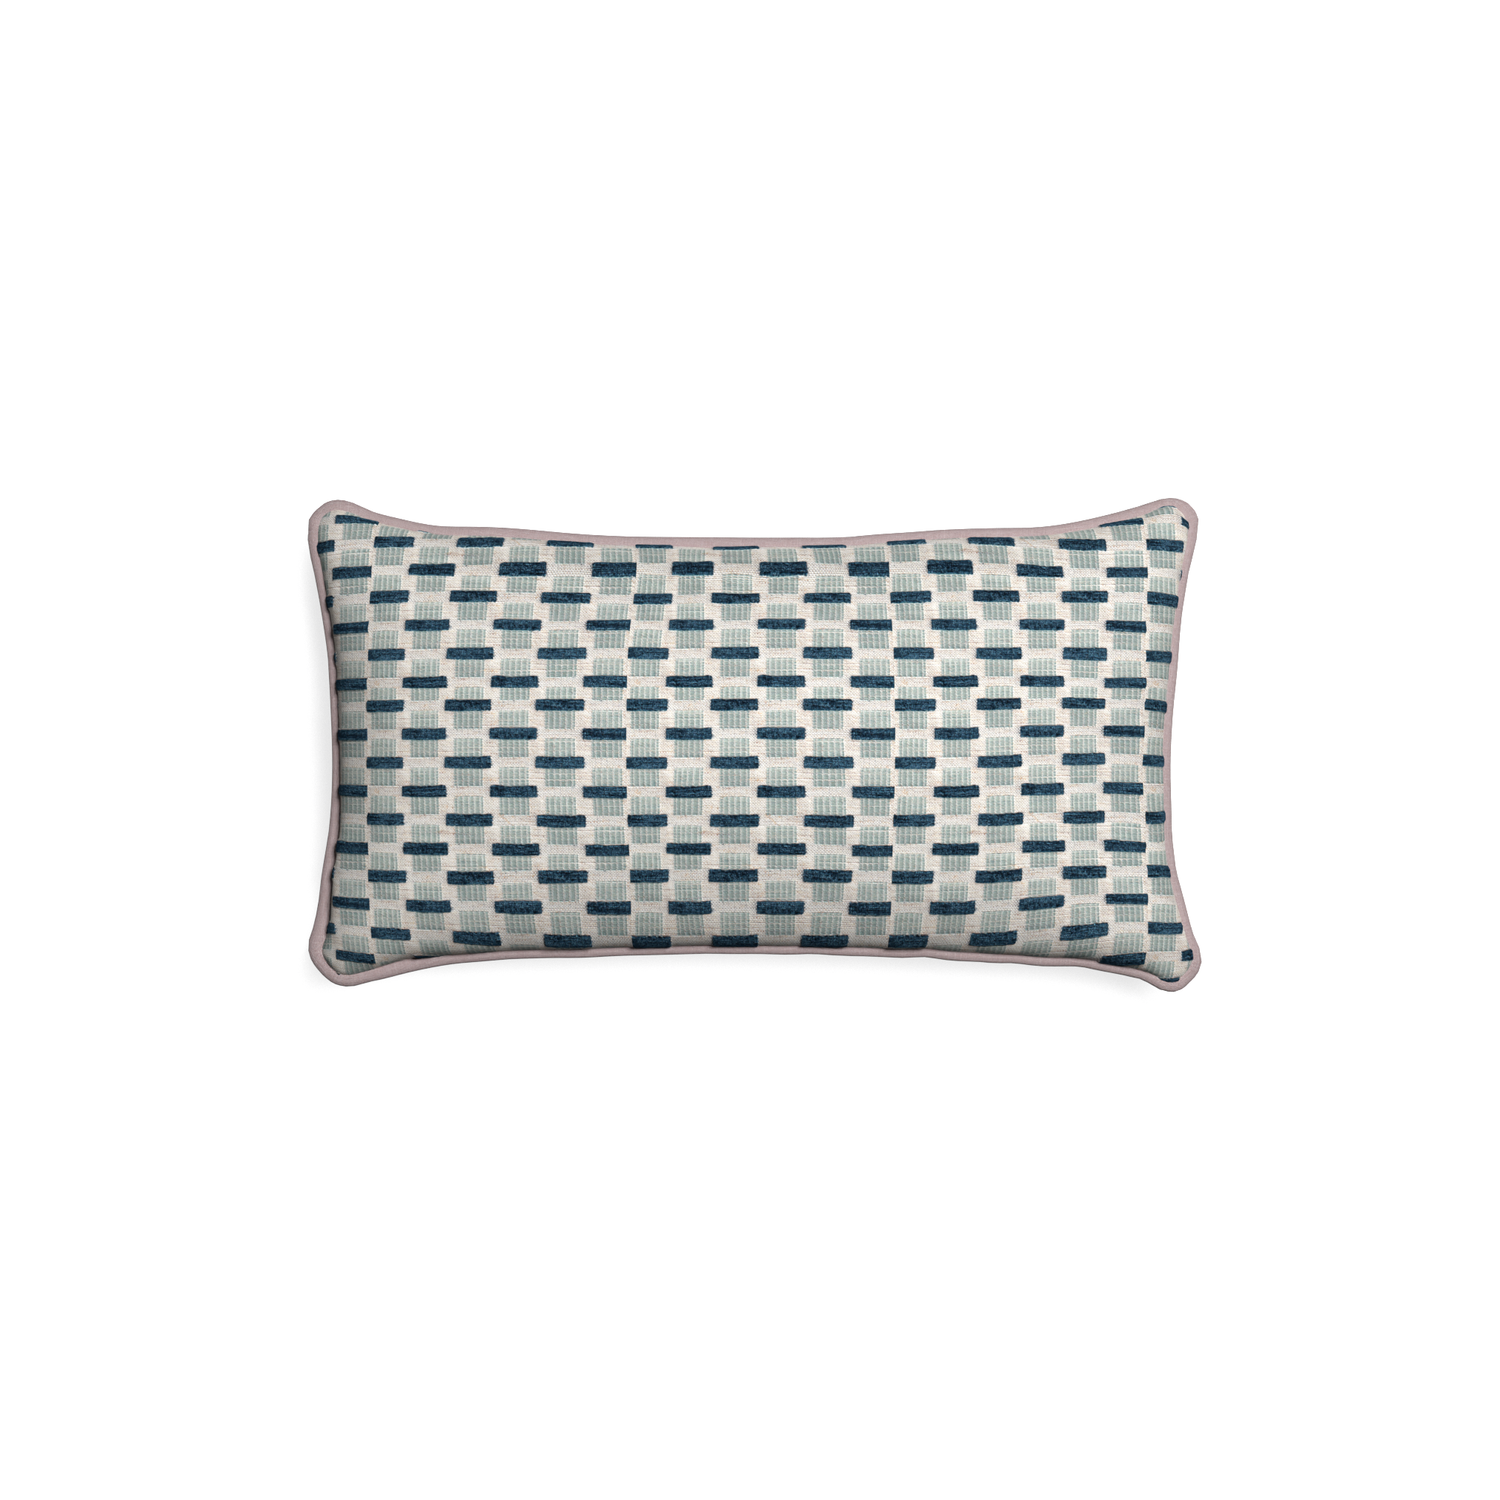 Petite-lumbar willow amalfi custom blue geometric chenillepillow with orchid piping on white background